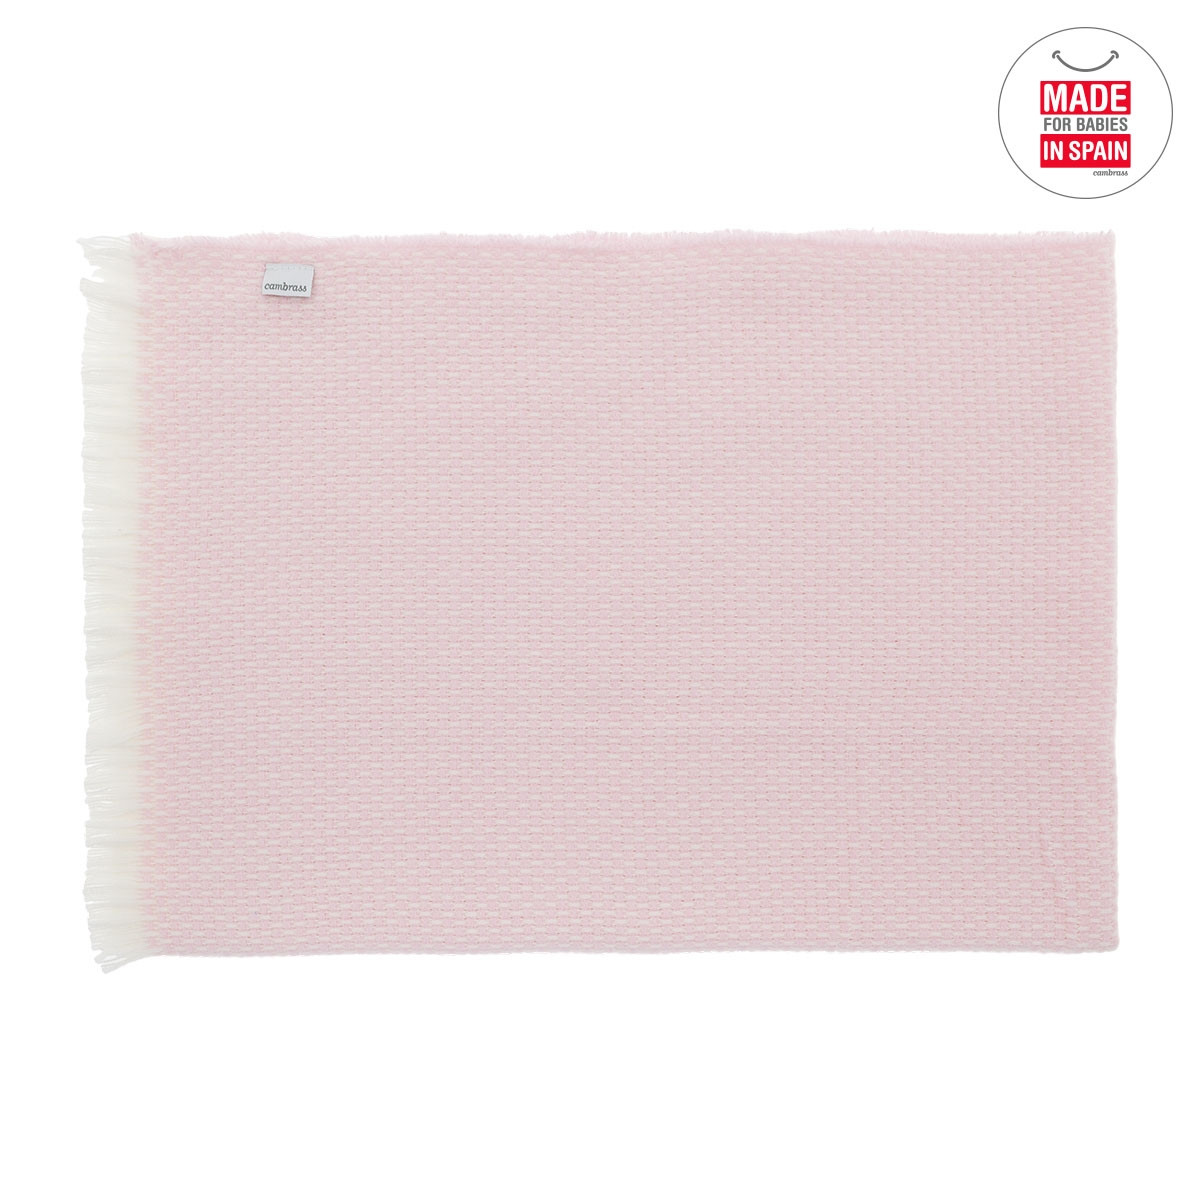 BLANKET PLAID BASIC PINK 75x110 CM CAMBRASS - 4